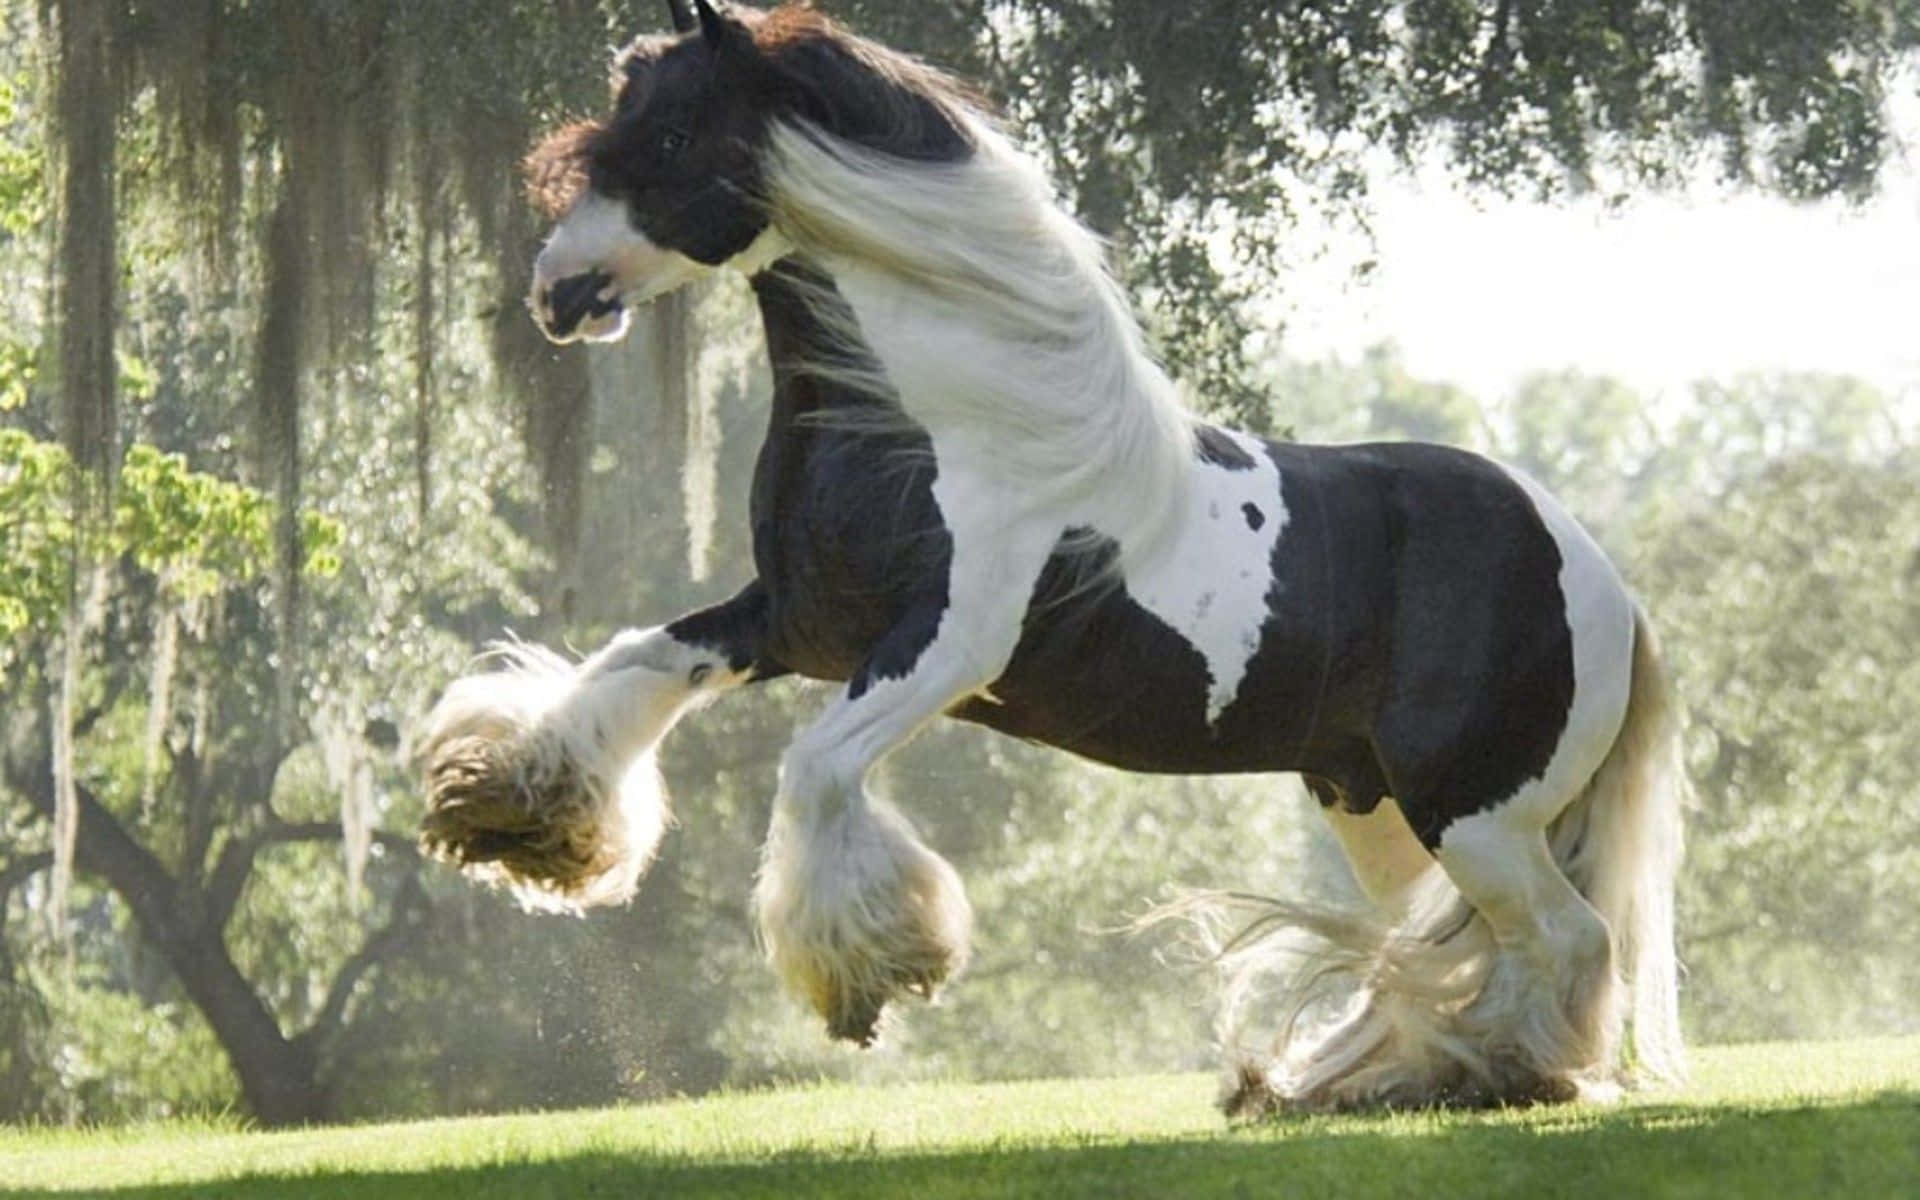 A Black And White Horse Is Running In The Grass